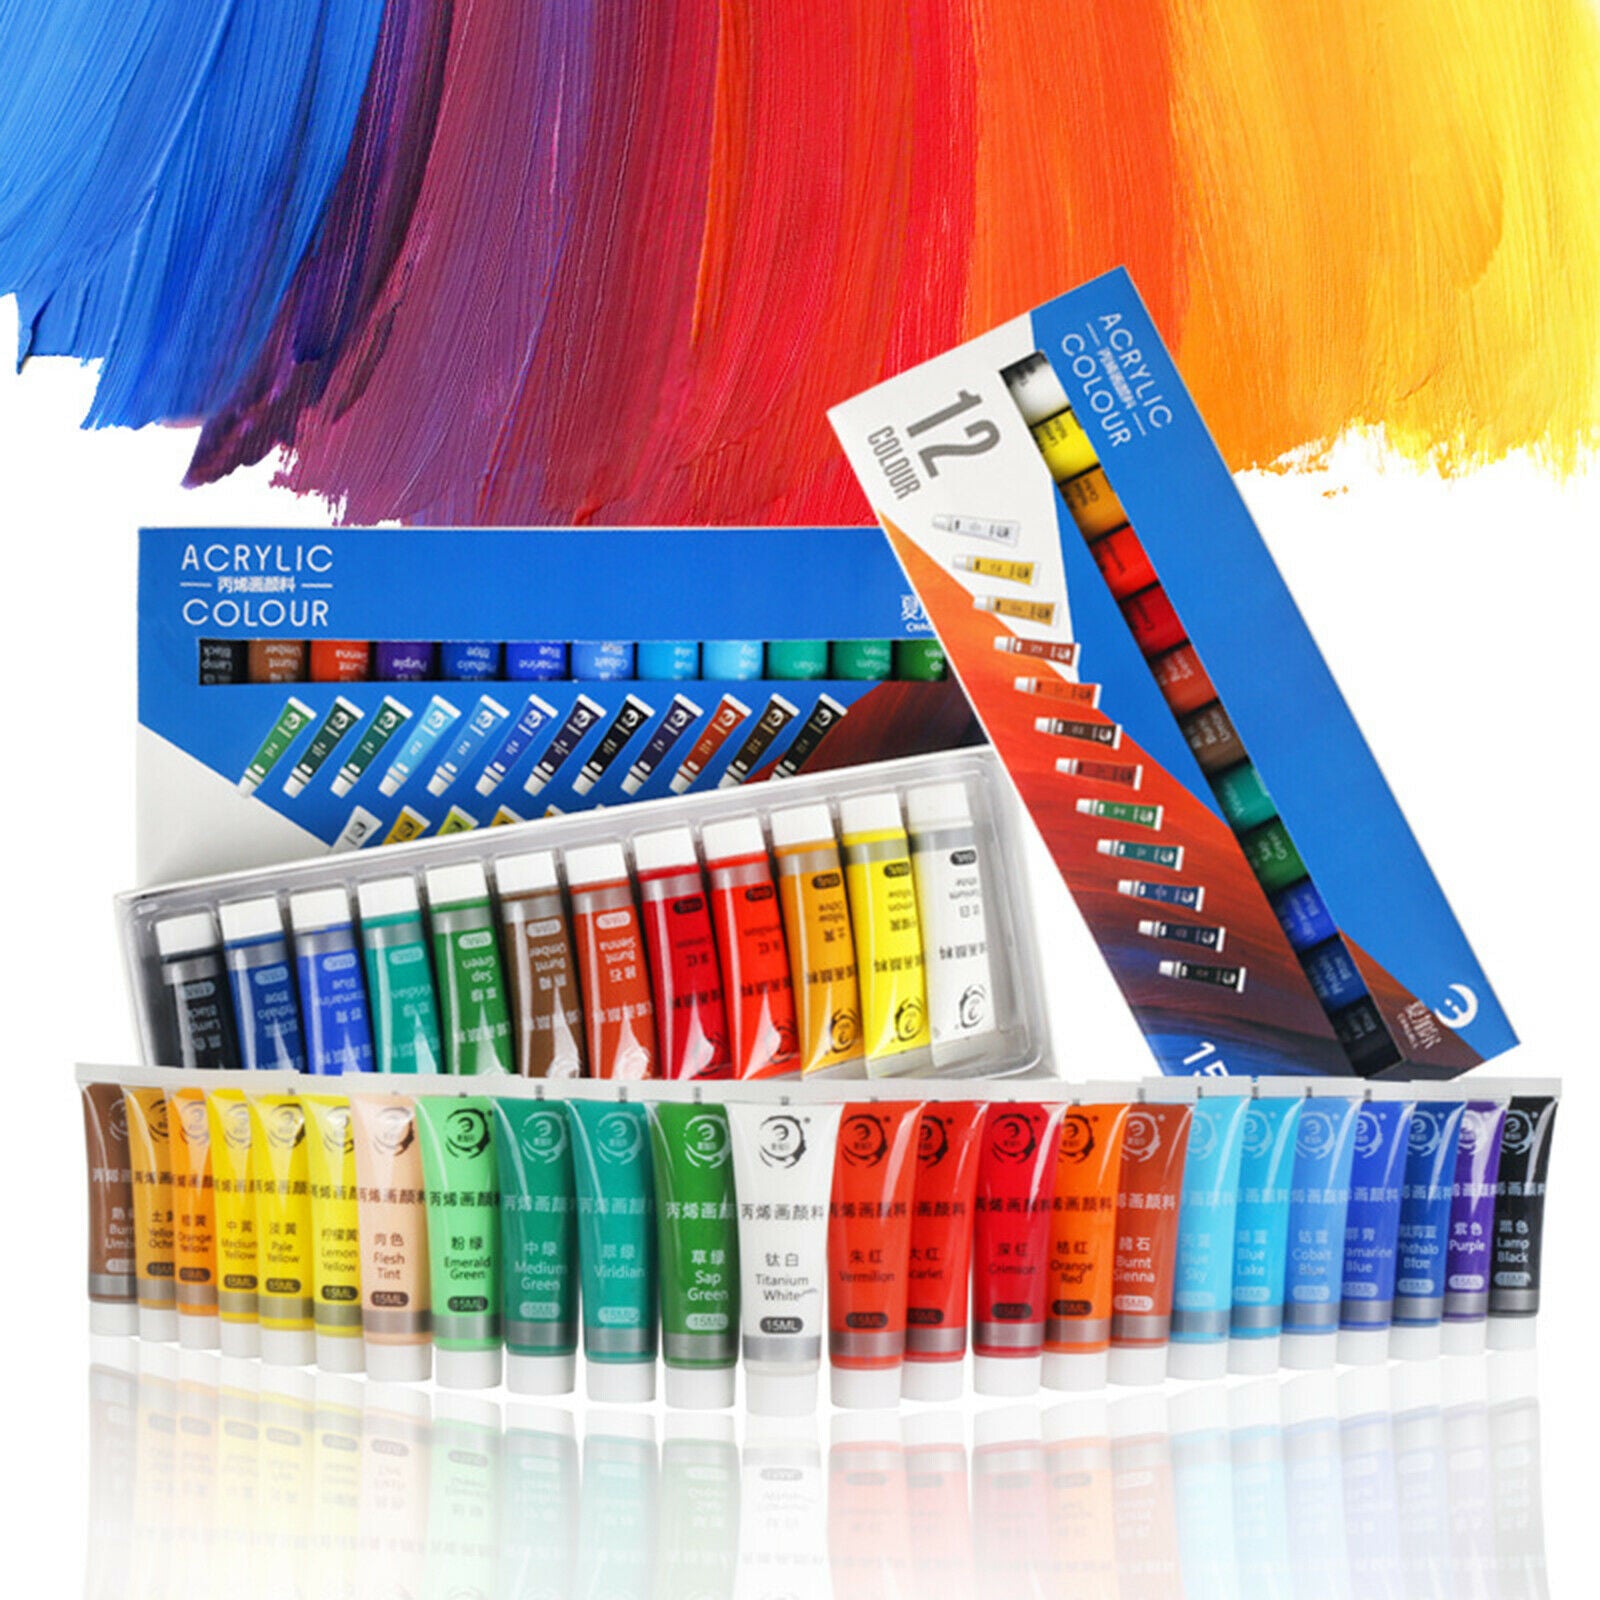 24x Acrylic Paint Kids Student Art Craft DIY Drawing on Canvas Wood Supplies